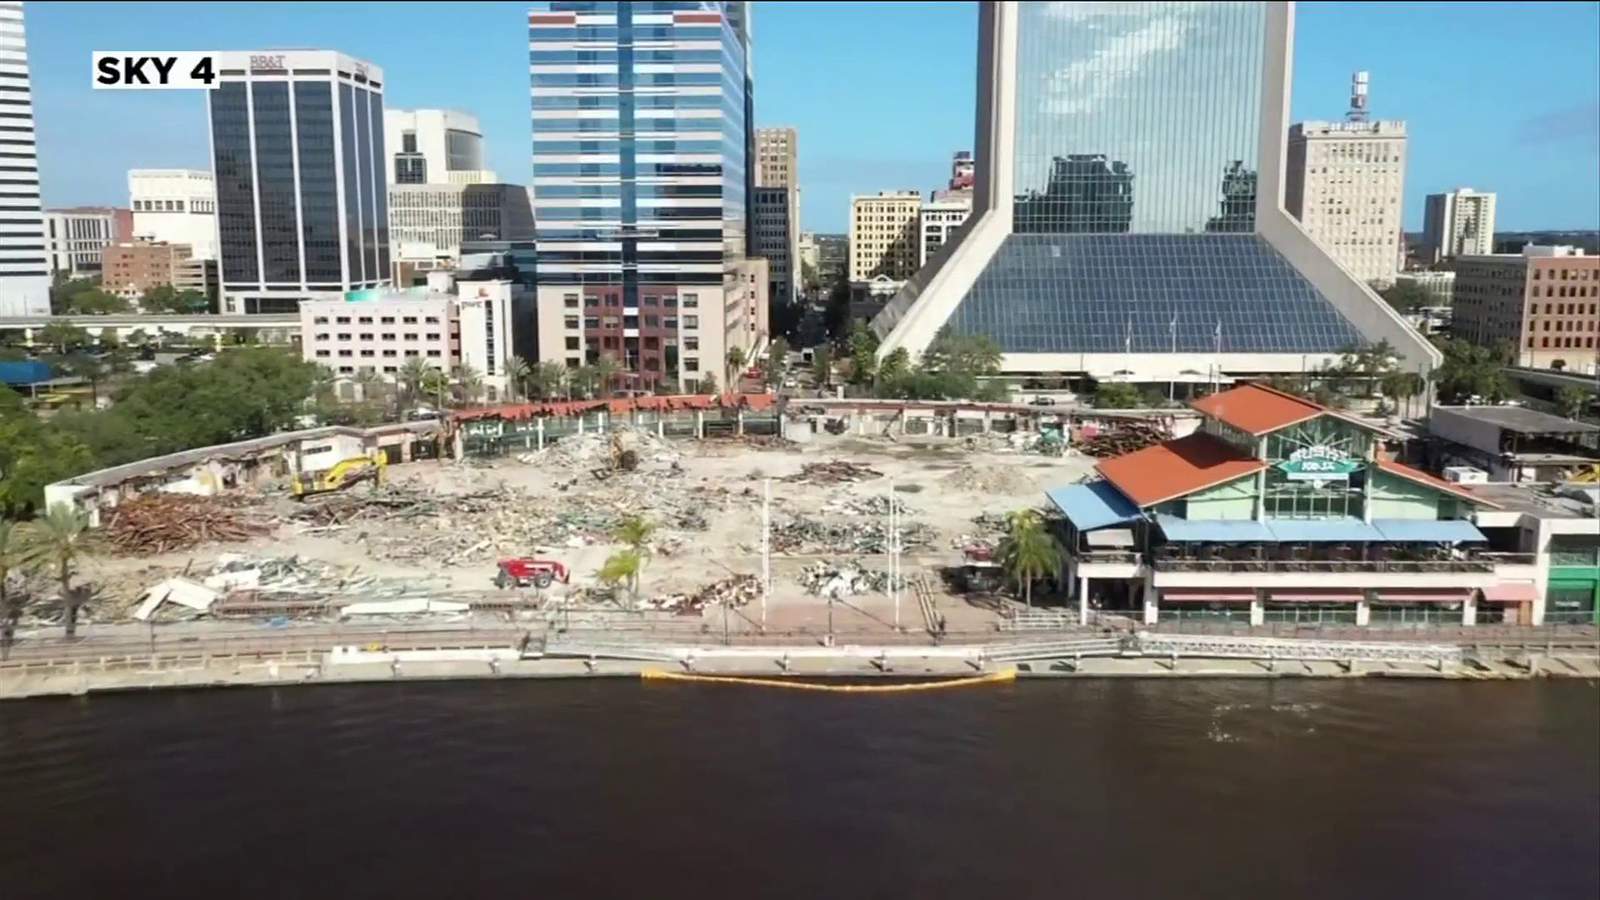 Only one building left standing at Jacksonville Landing